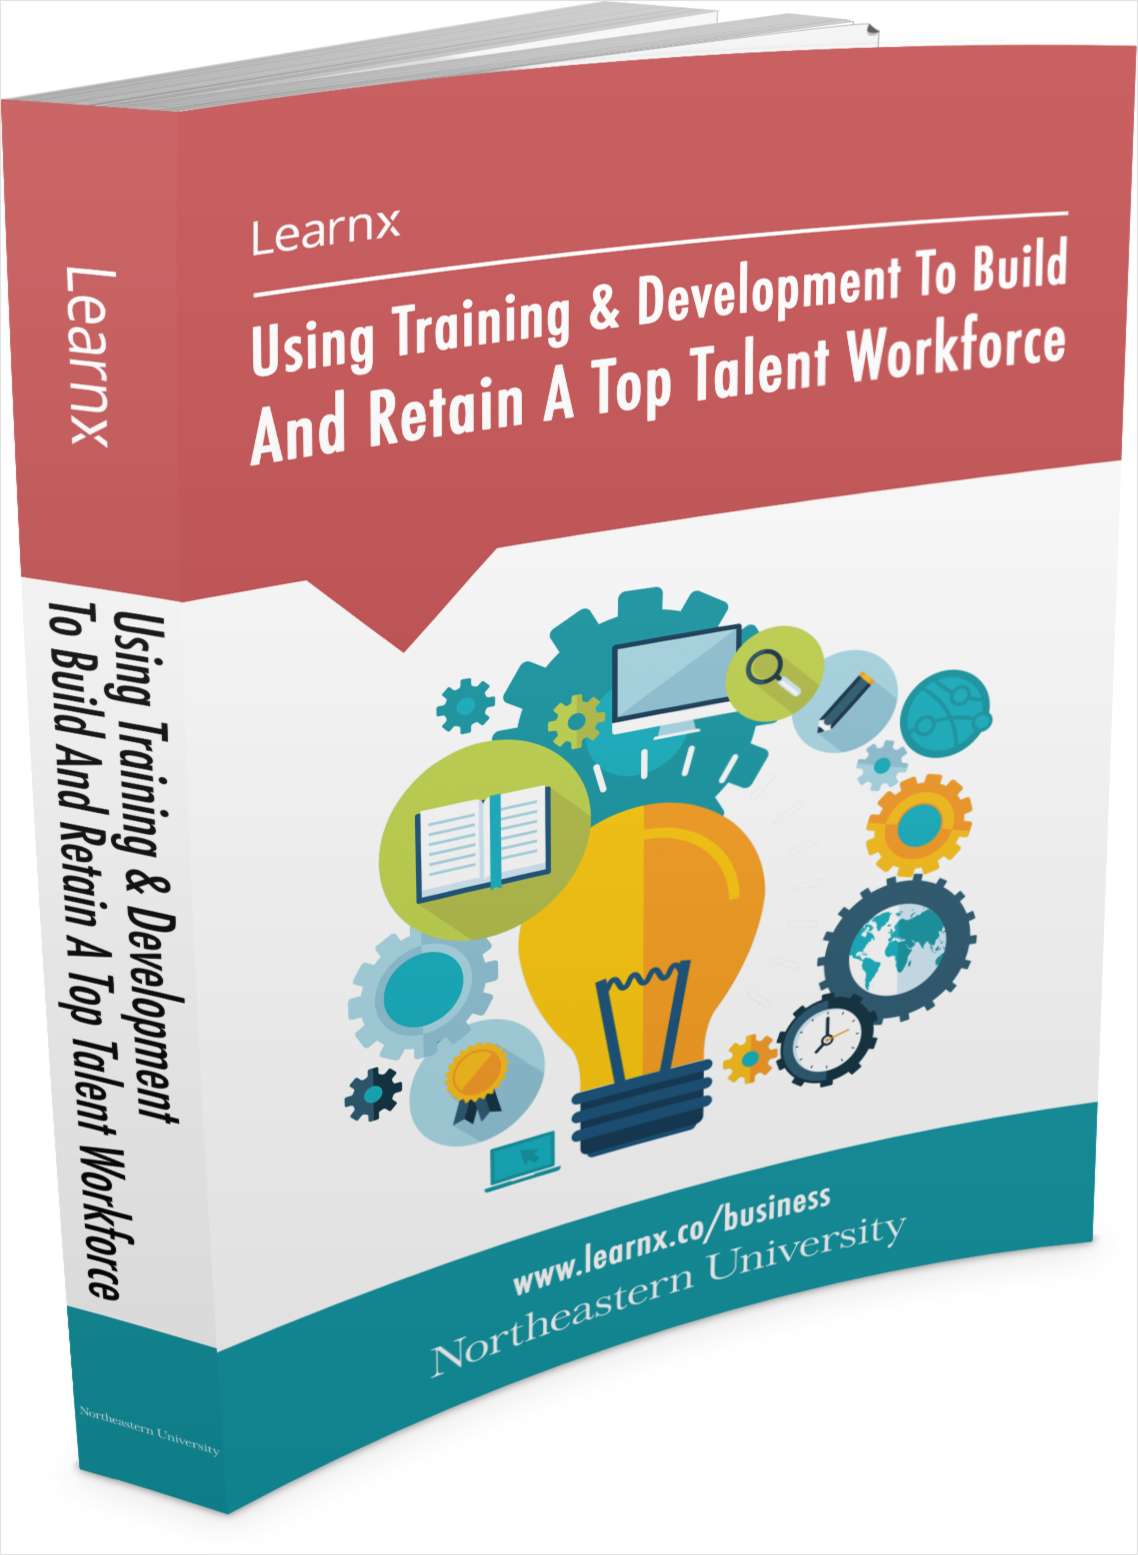 Using Training & Development To Build And Retain A Top Talent Workforce